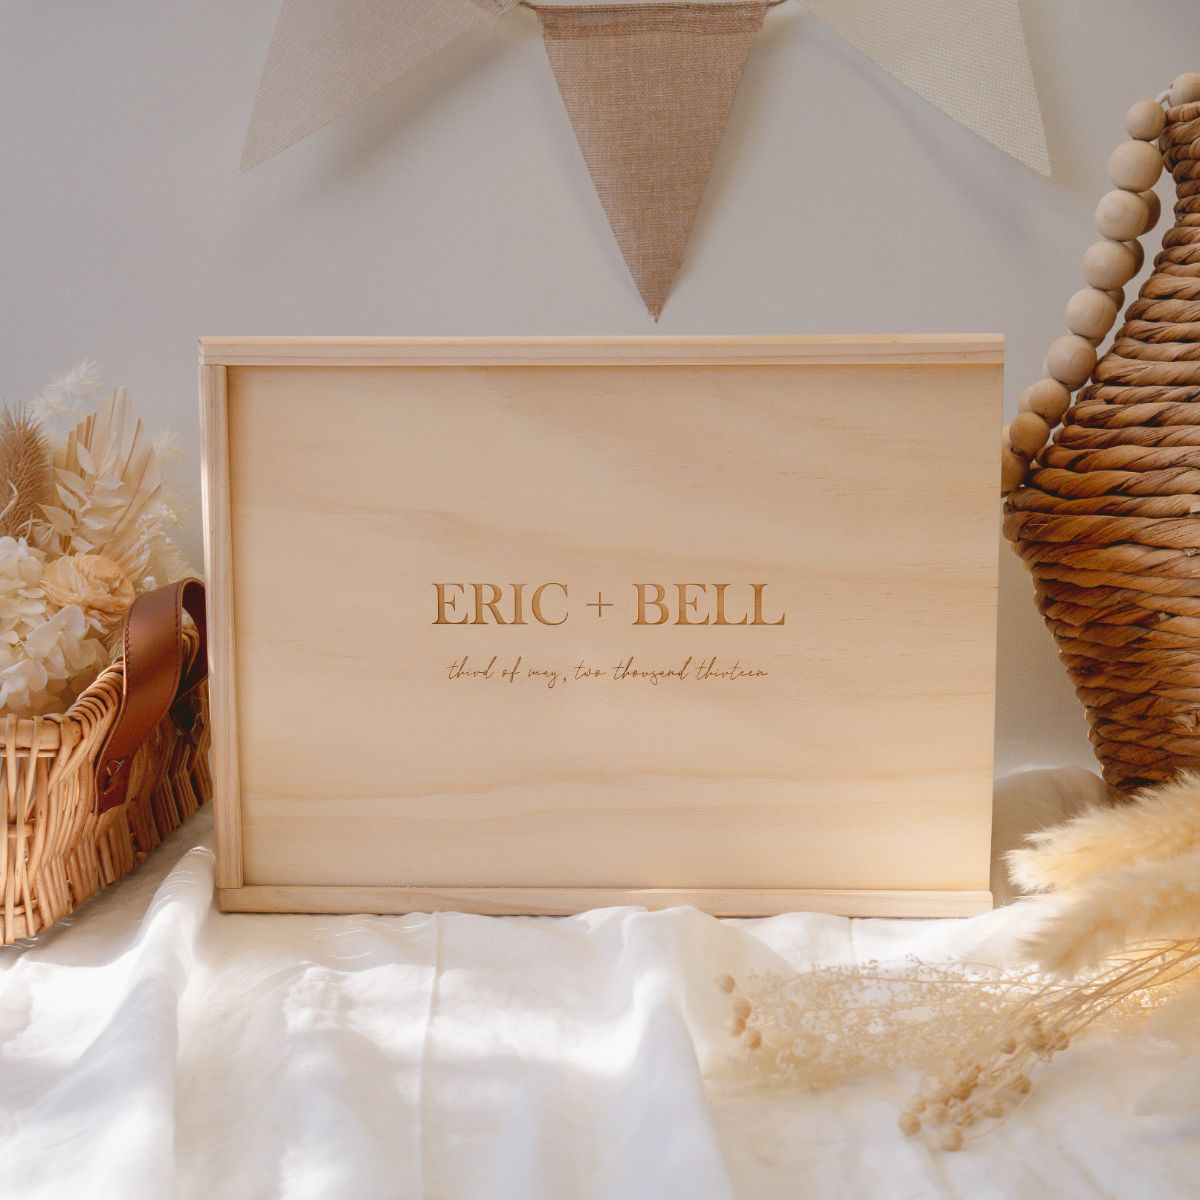 This is a large wooden wedding keepsake box with a plain text design (and plus sign) and a date of the wedding underneath